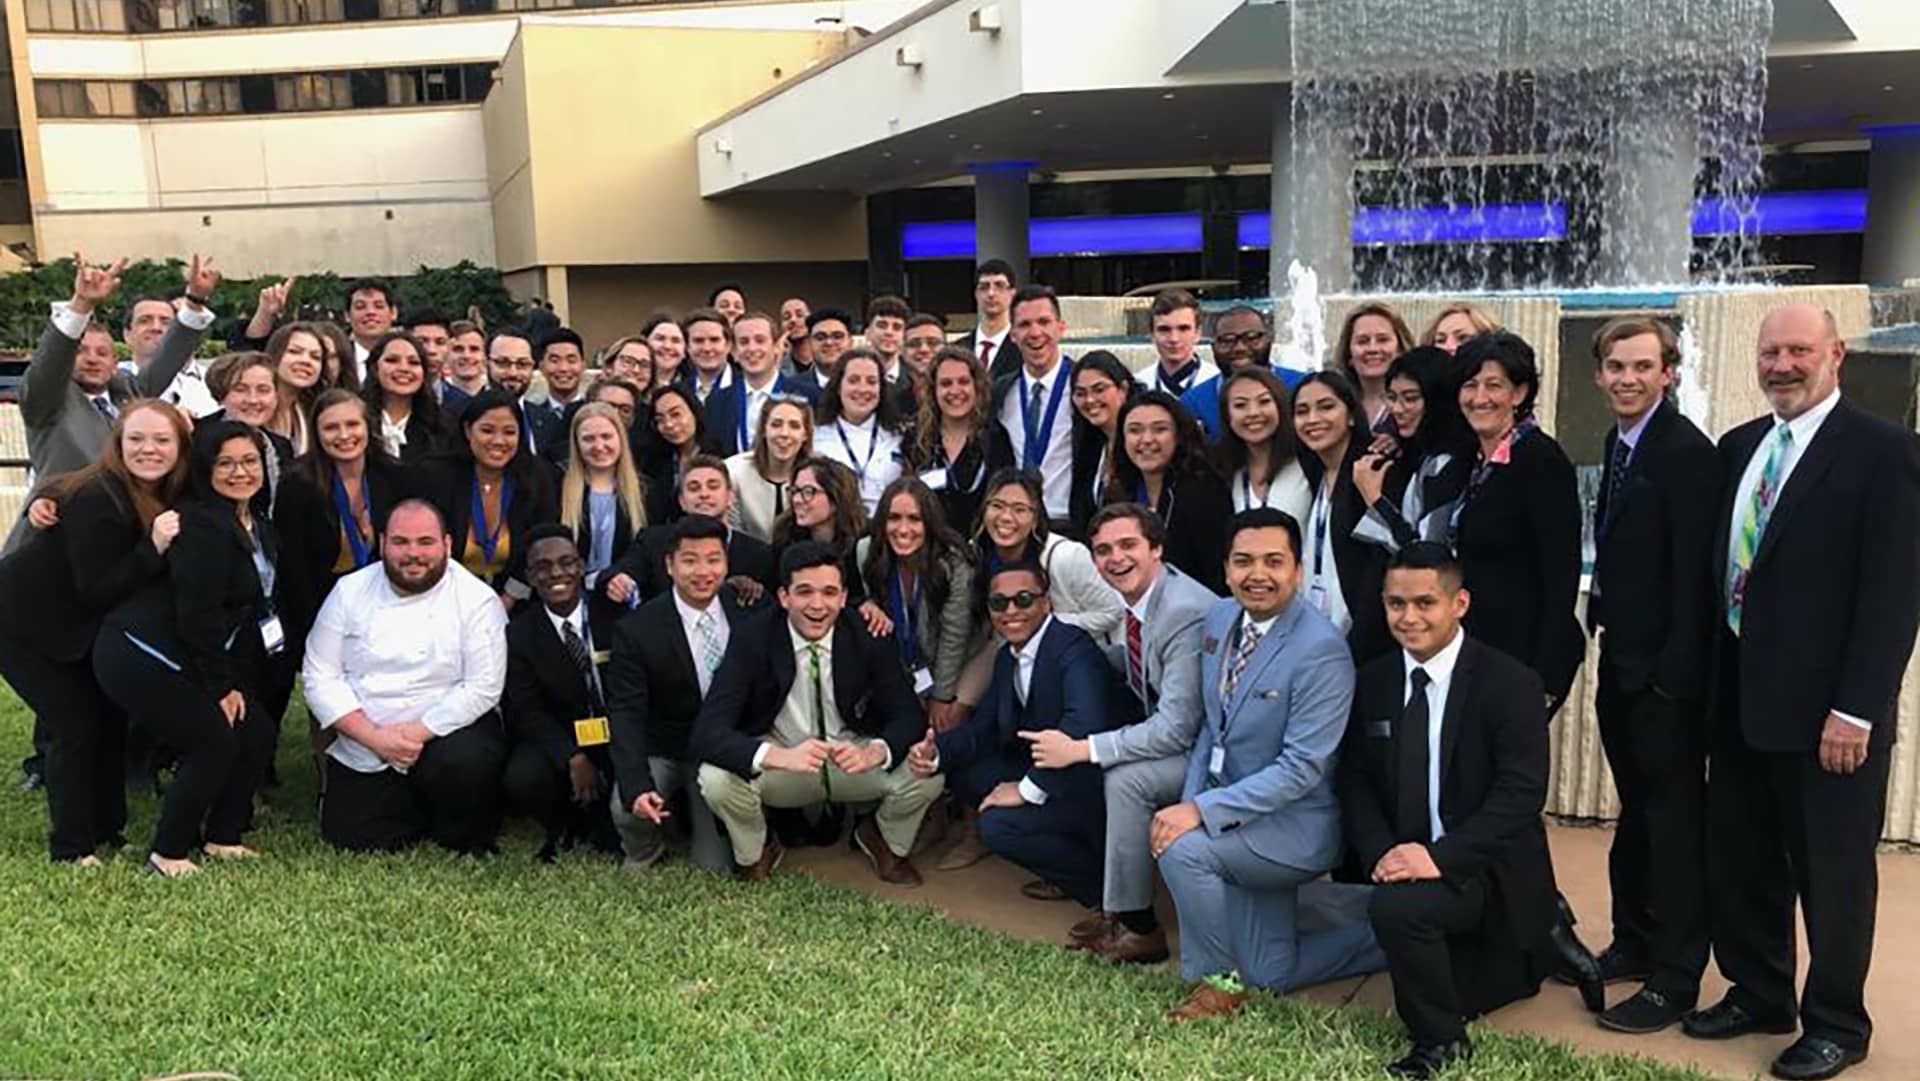 full DECA group shot in front of fountain